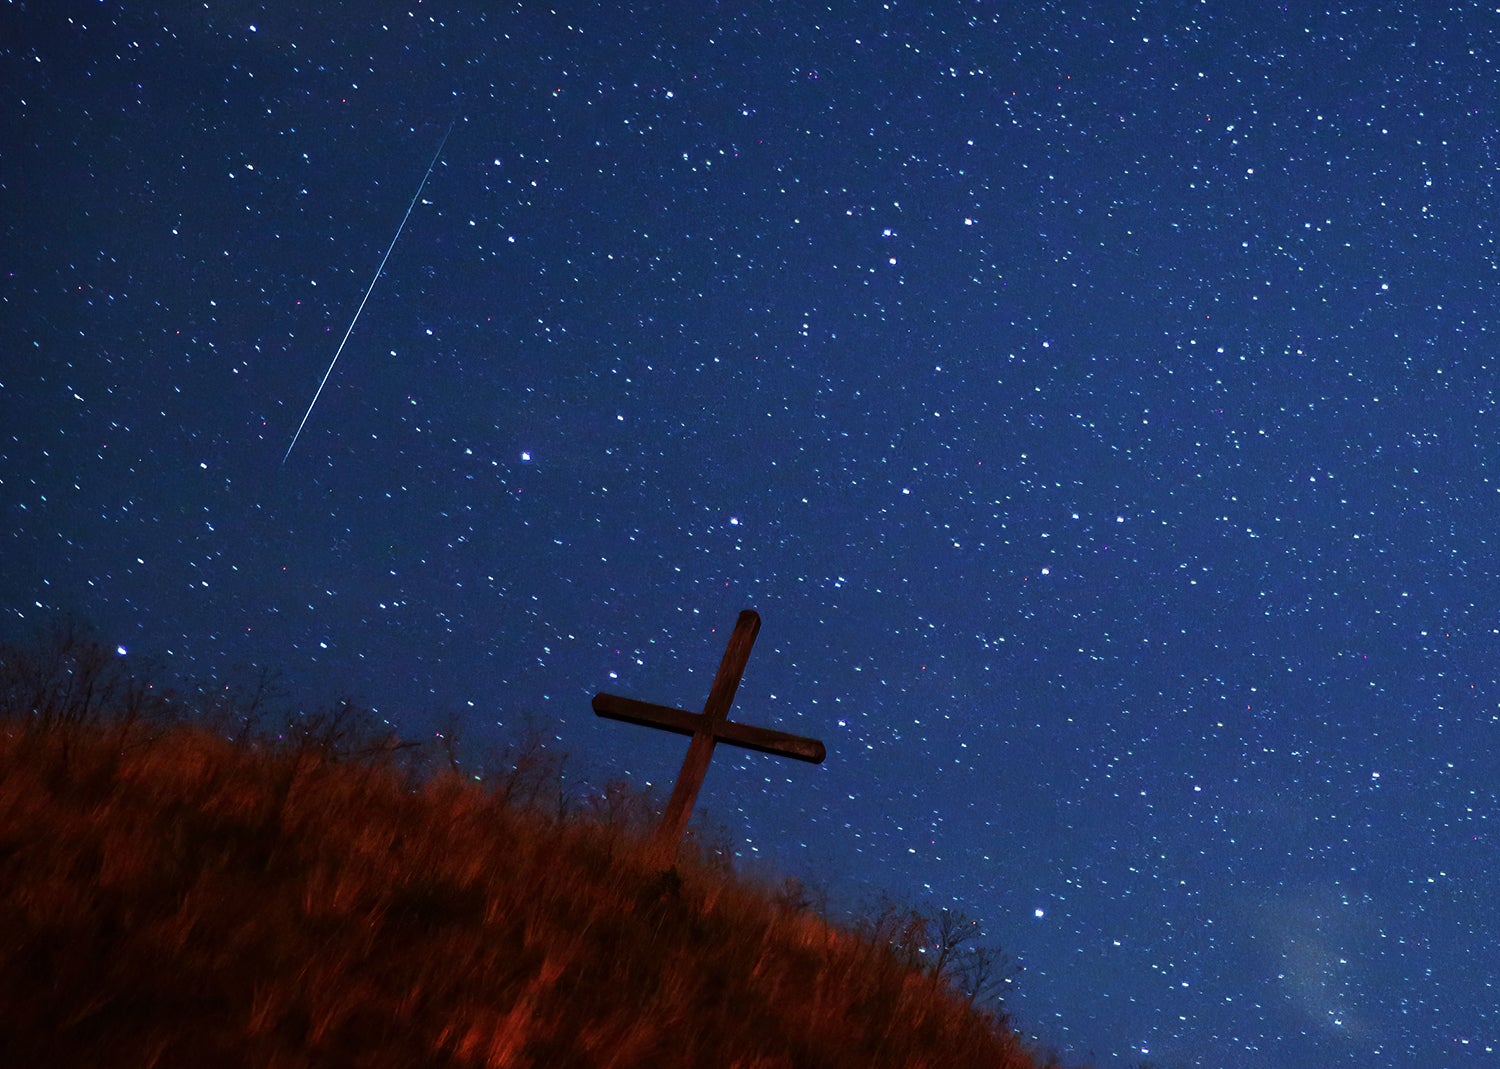 GROSSMUGL, AUSTRIA - AUGUST 13: A meteor streaks across the night sky above Leeberg hill during the Perseid meteor shower on August 13, 2023 in Grossmugl, Austria. (Photo by Heinz-Peter Bader/Getty Images)